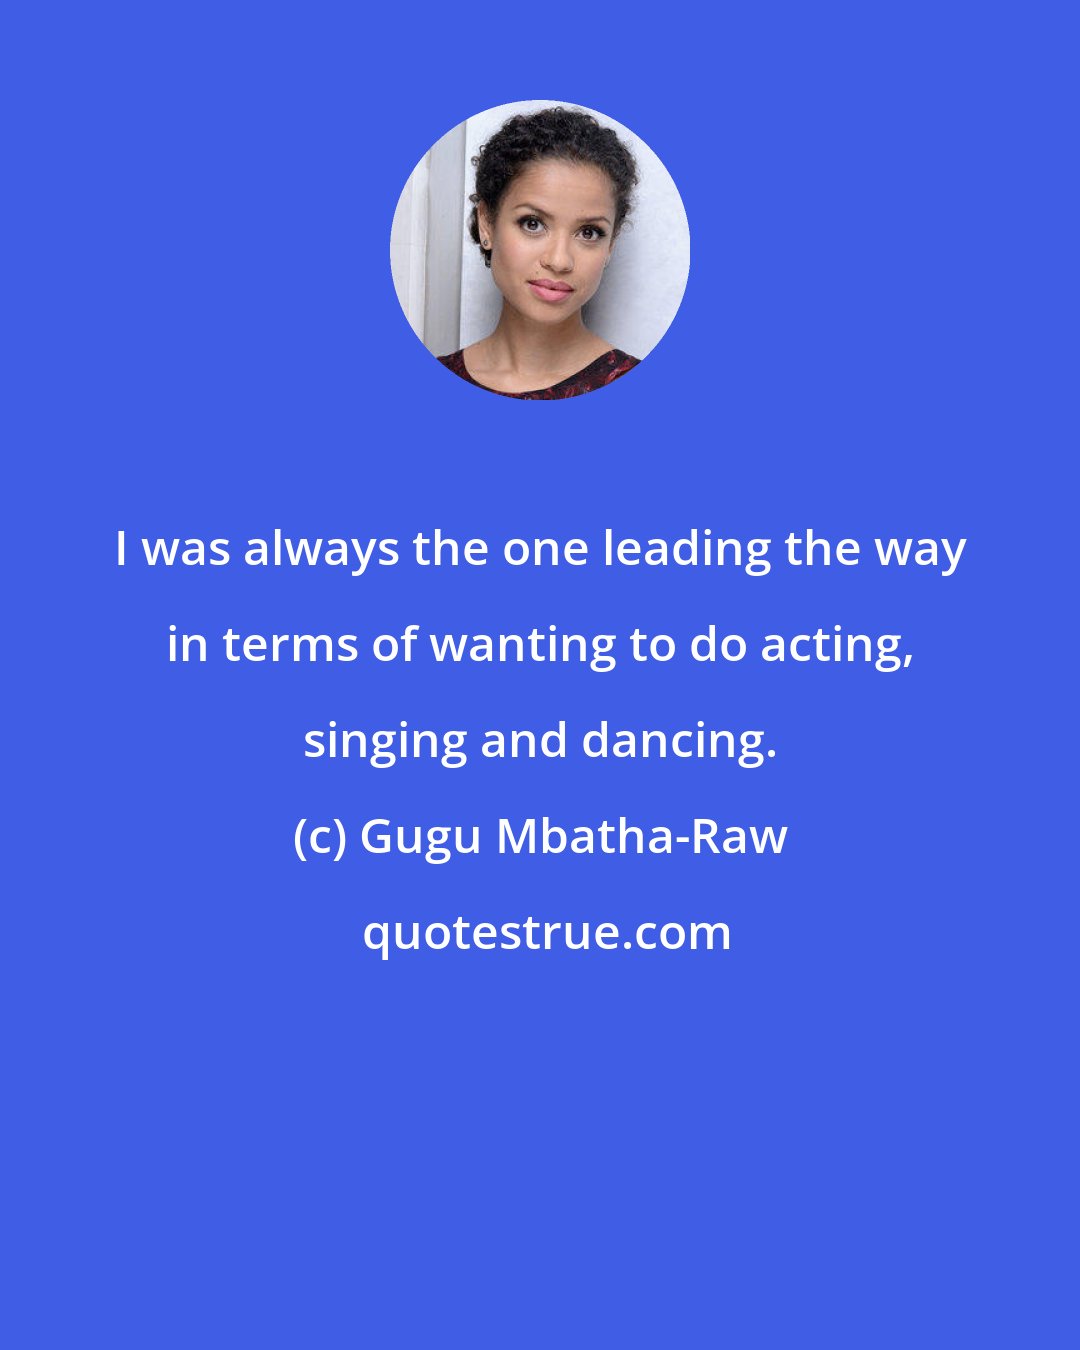 Gugu Mbatha-Raw: I was always the one leading the way in terms of wanting to do acting, singing and dancing.